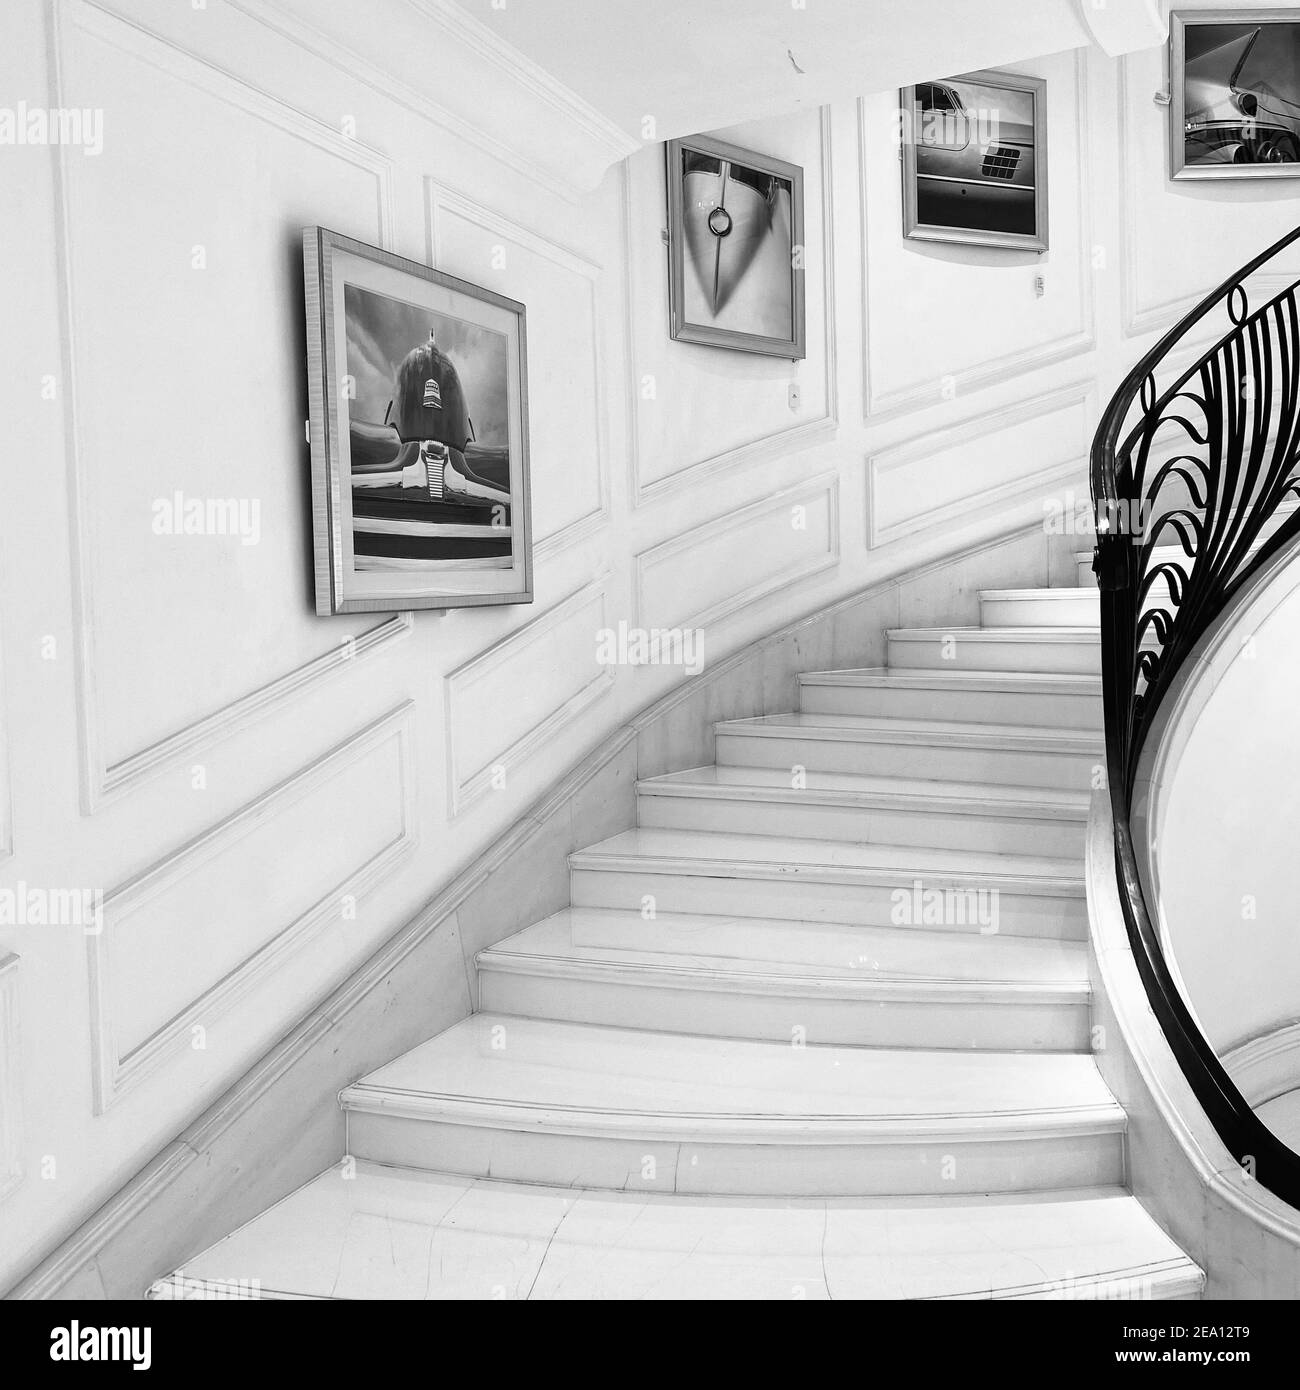 Black and white interior design of hallway. Staircase with marble stairs and forged handrails. Pictures of some random car parts on the wall Stock Photo